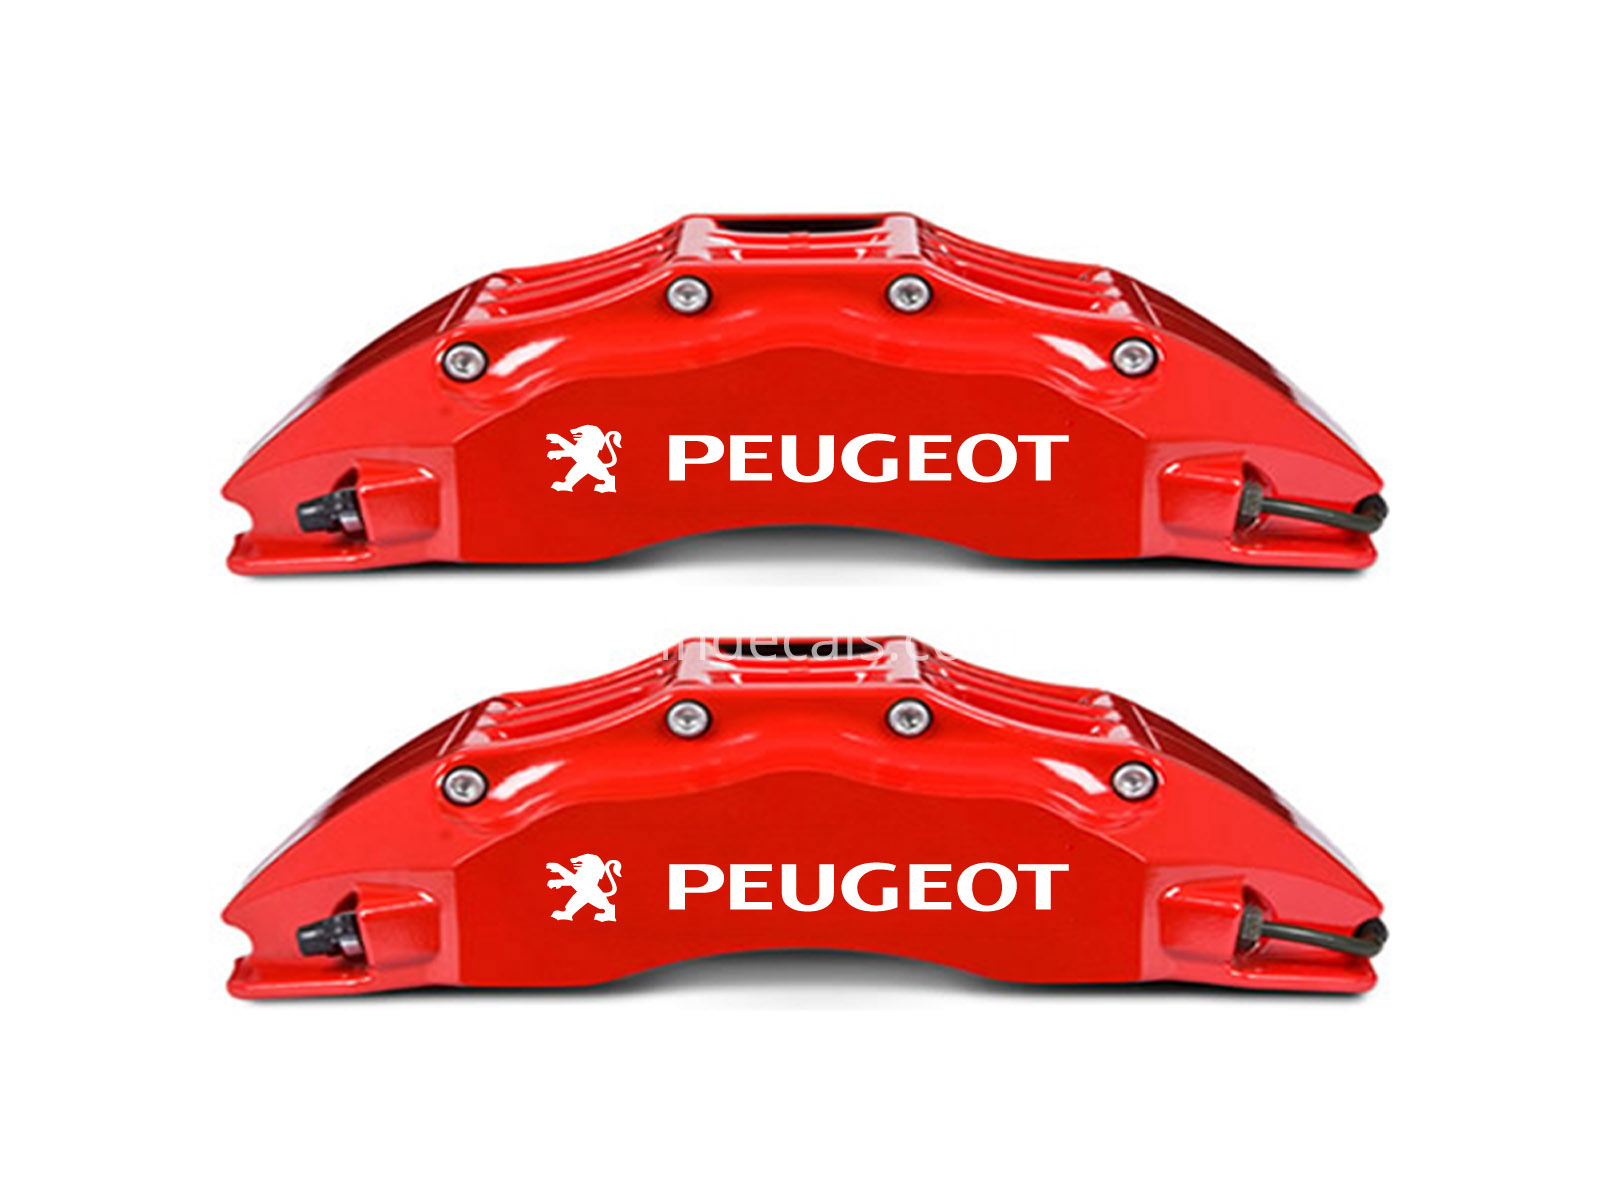 6 x Peugeot Stickers for Brakes - White